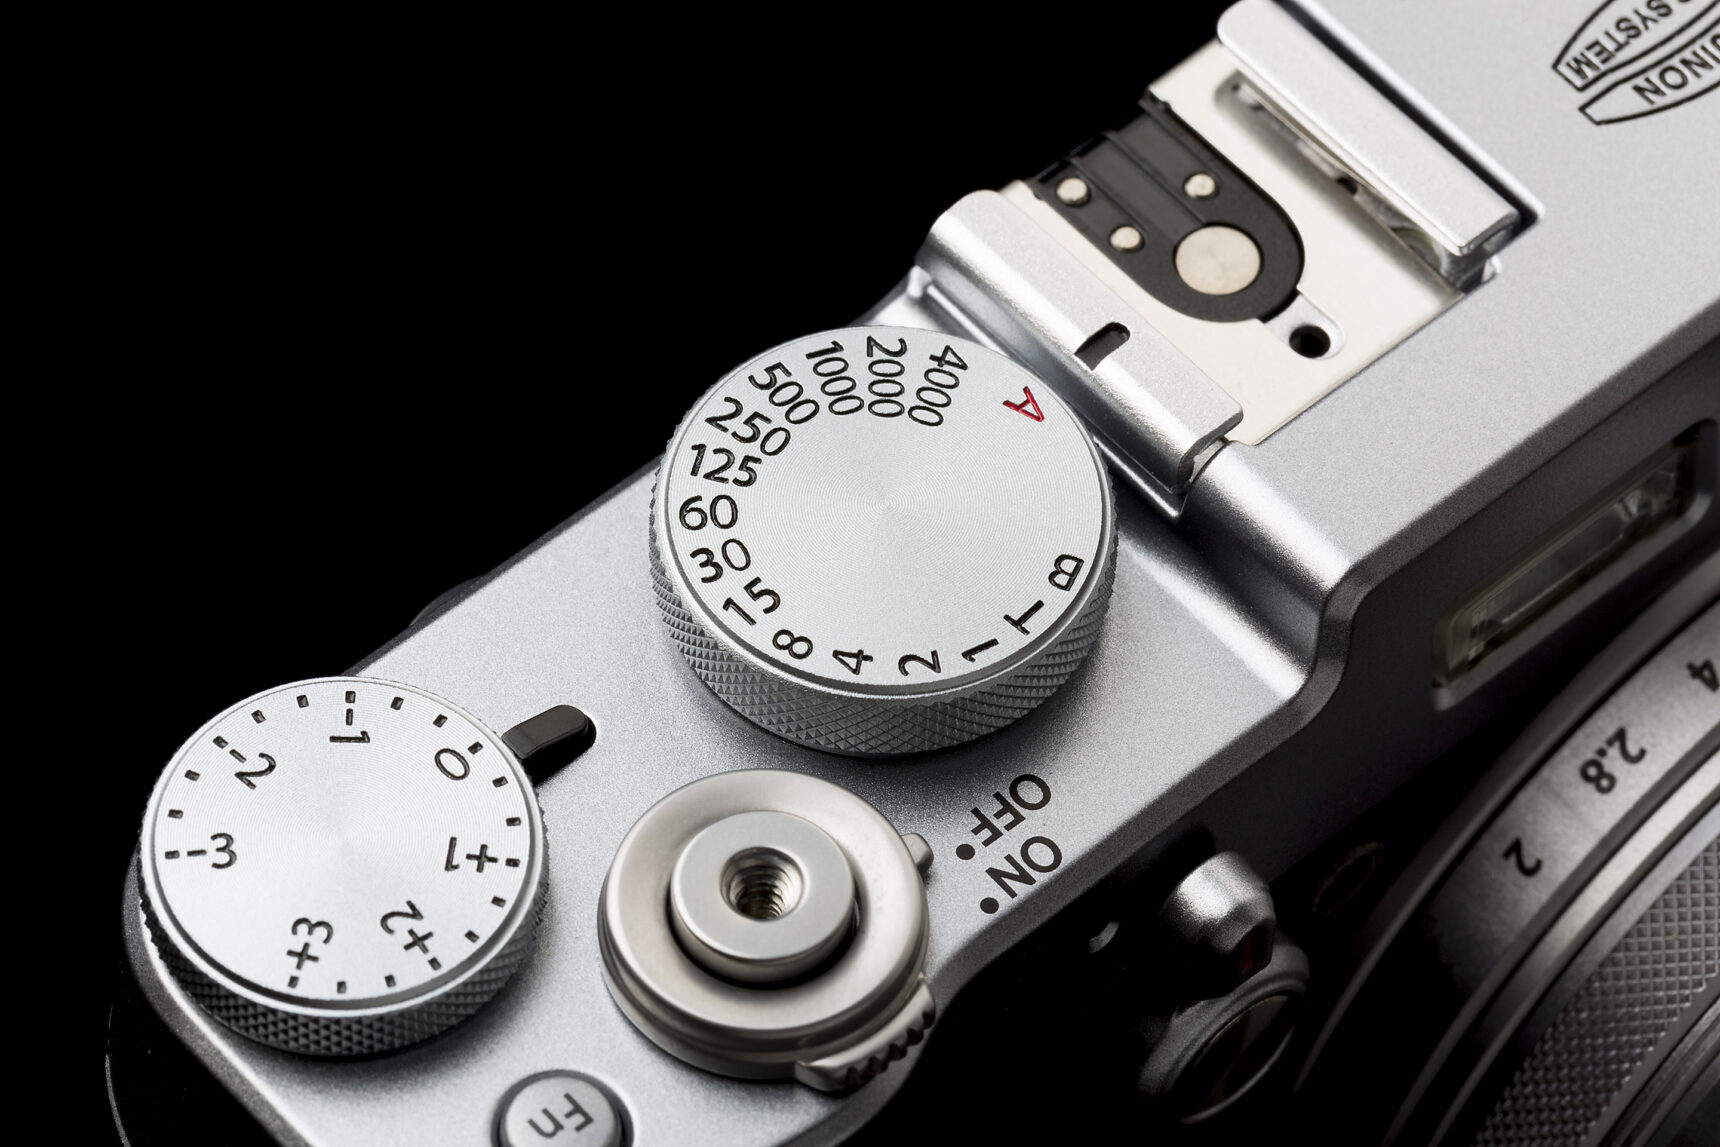 Fuji X100T Street Photography Review - Silver Top